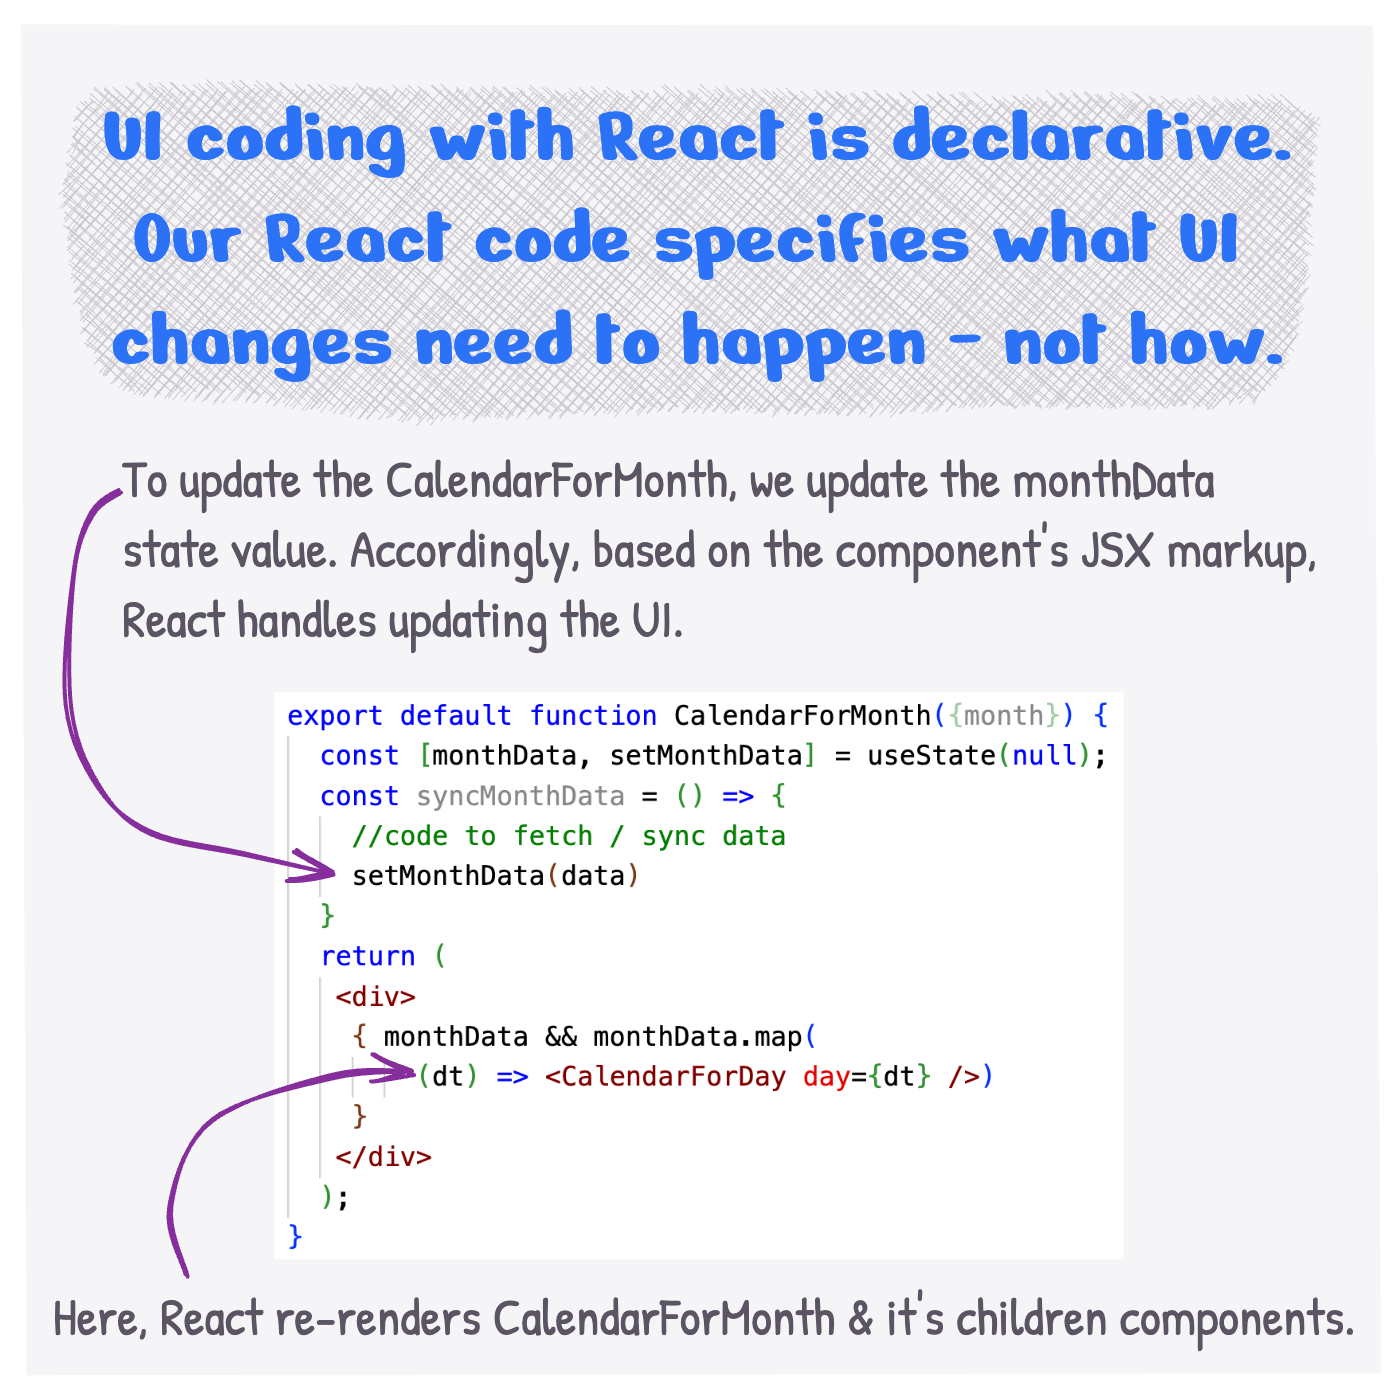 UI coding with React is declarative. Our React code specifies what UI changes need to happen - not how. To update the CalendarForMonth, we update the monthData state value. Accordingly, based on the component's JSX markup,React handles updating the UI. Here, React re-renders CalendarForMonth & it's children components.